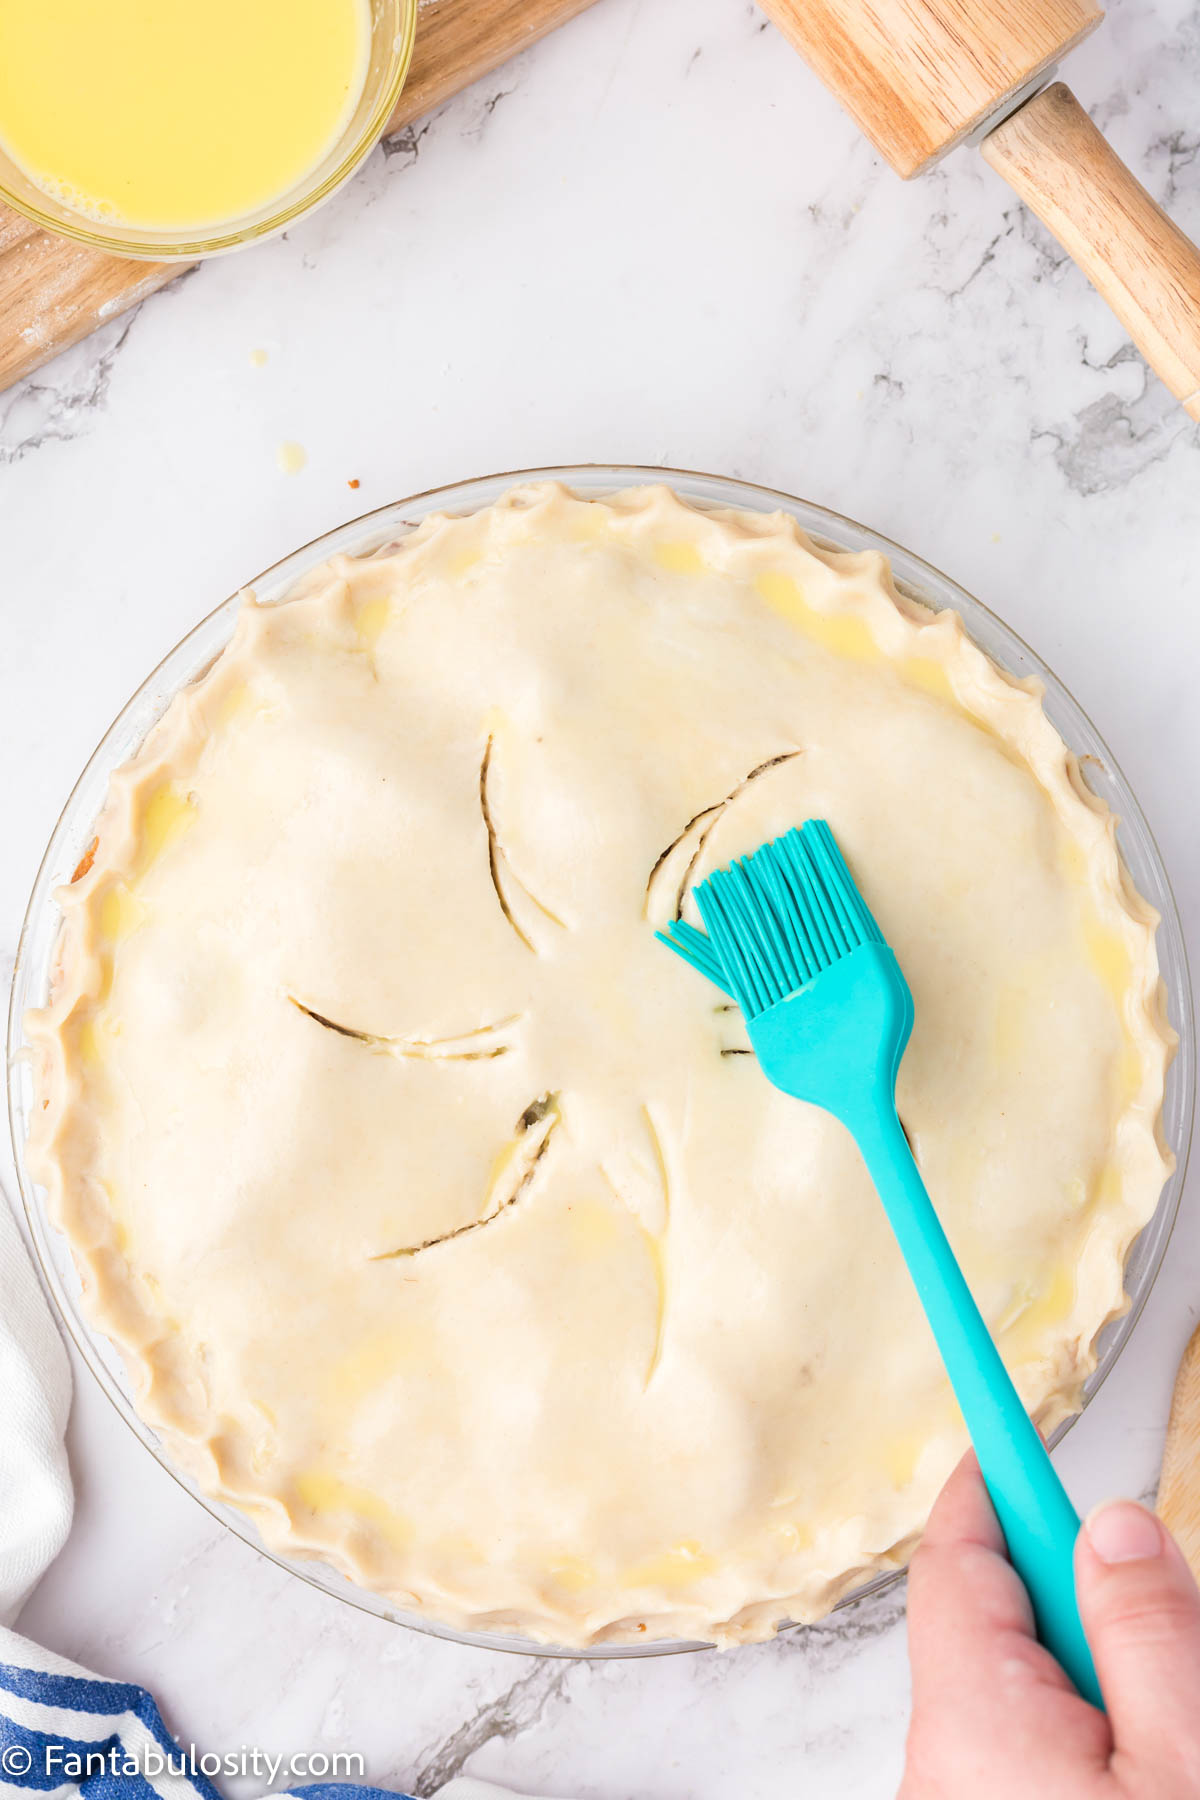 A pastry brush brushing an unbaked pie.